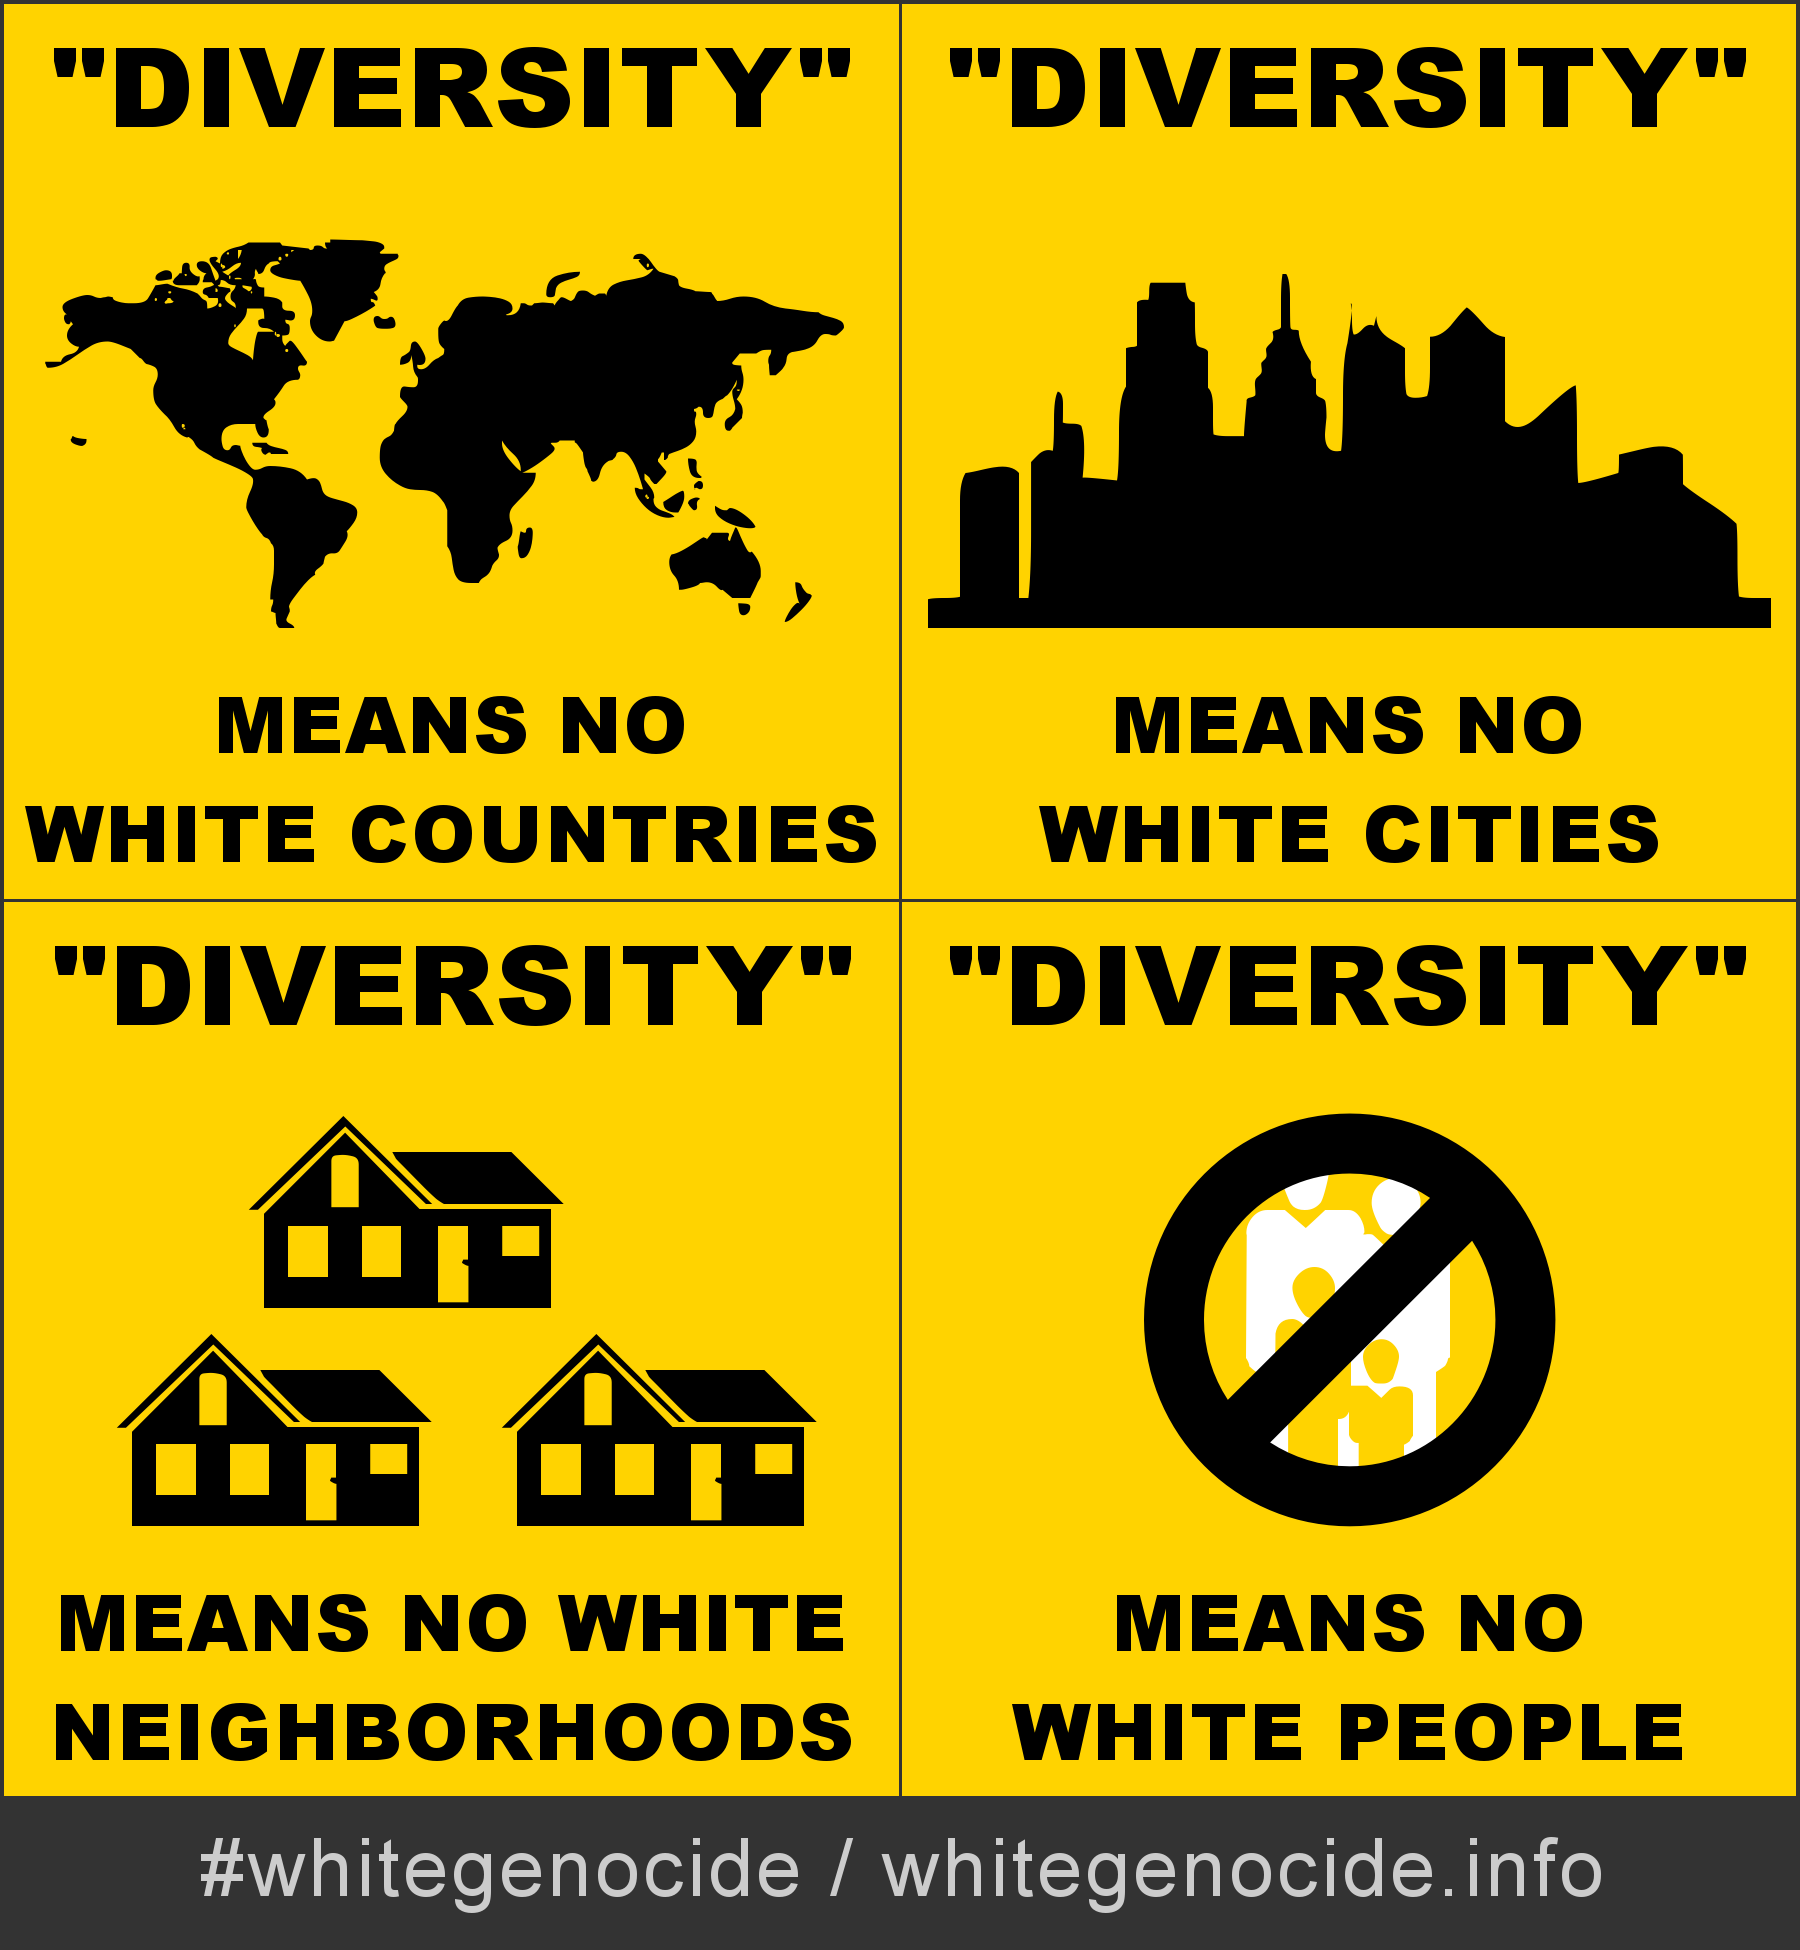 graphic - diversity means no white